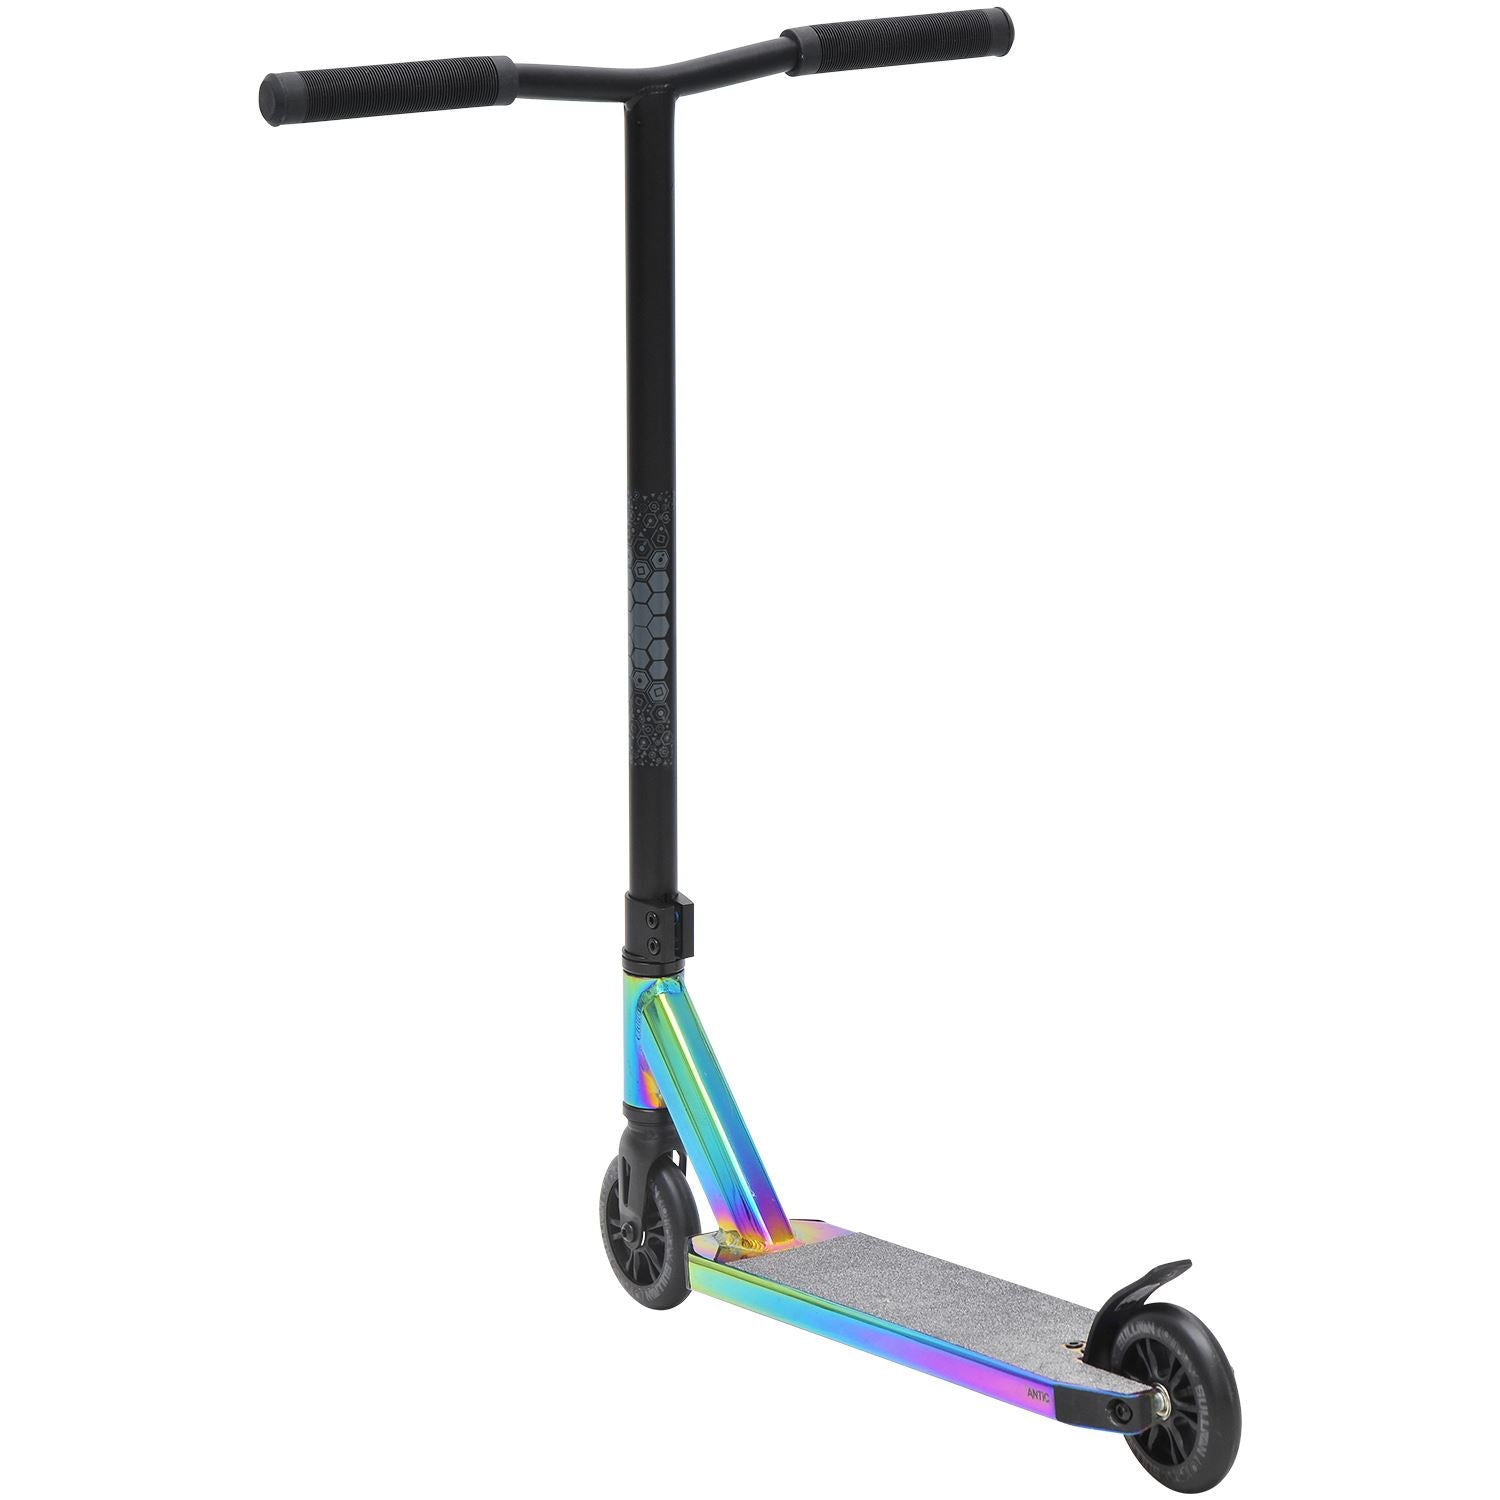 Sullivan Neo Chrome Antic Stunt Scooter for Kids Age 6-12 – Rideminded US